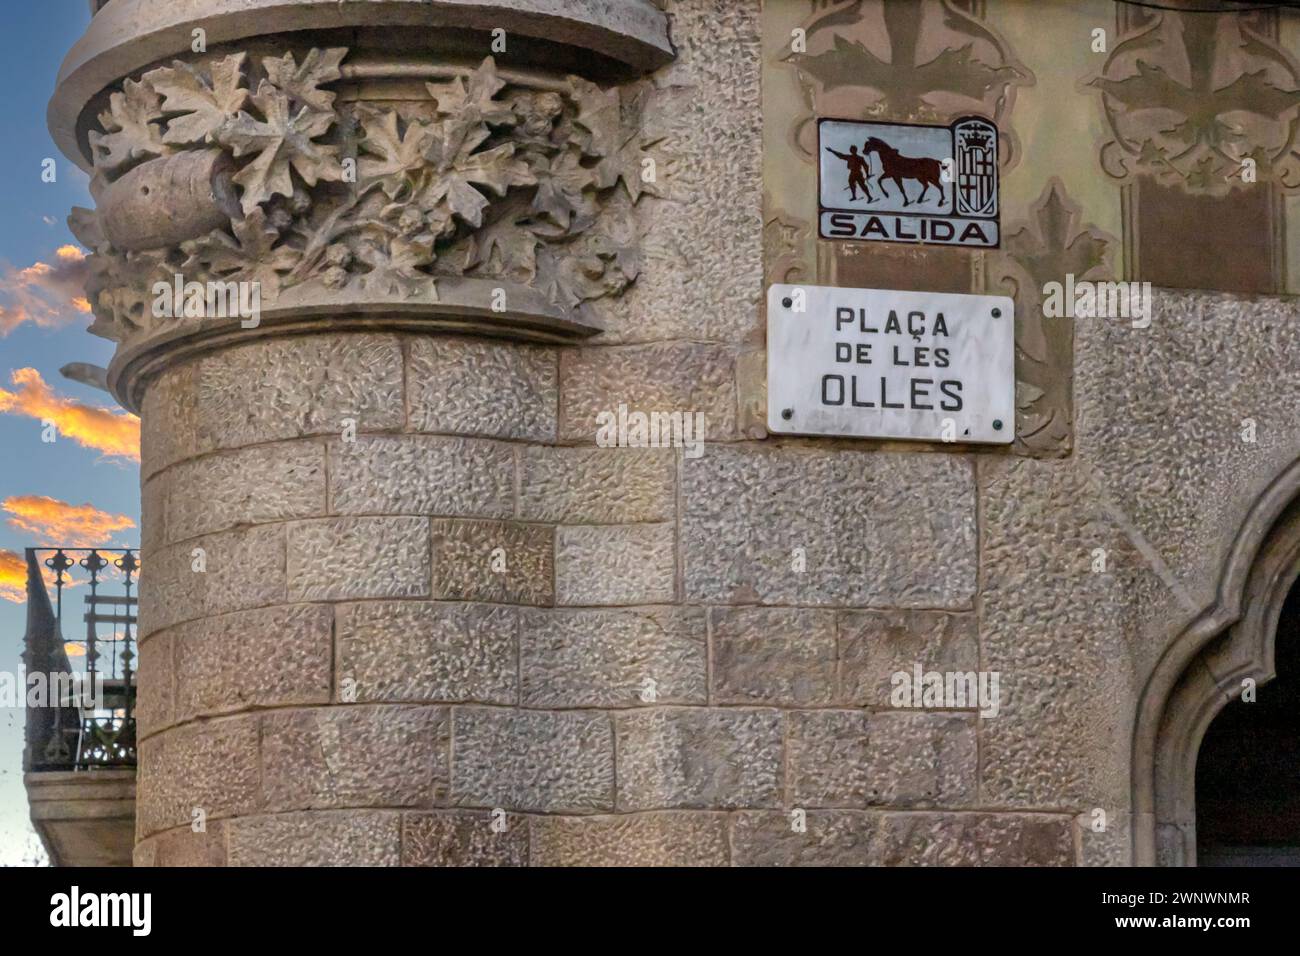 Old building background with specific spanish inscription for Square de les Olles in Barcelona, Catalonia, Spain. Stock Photo